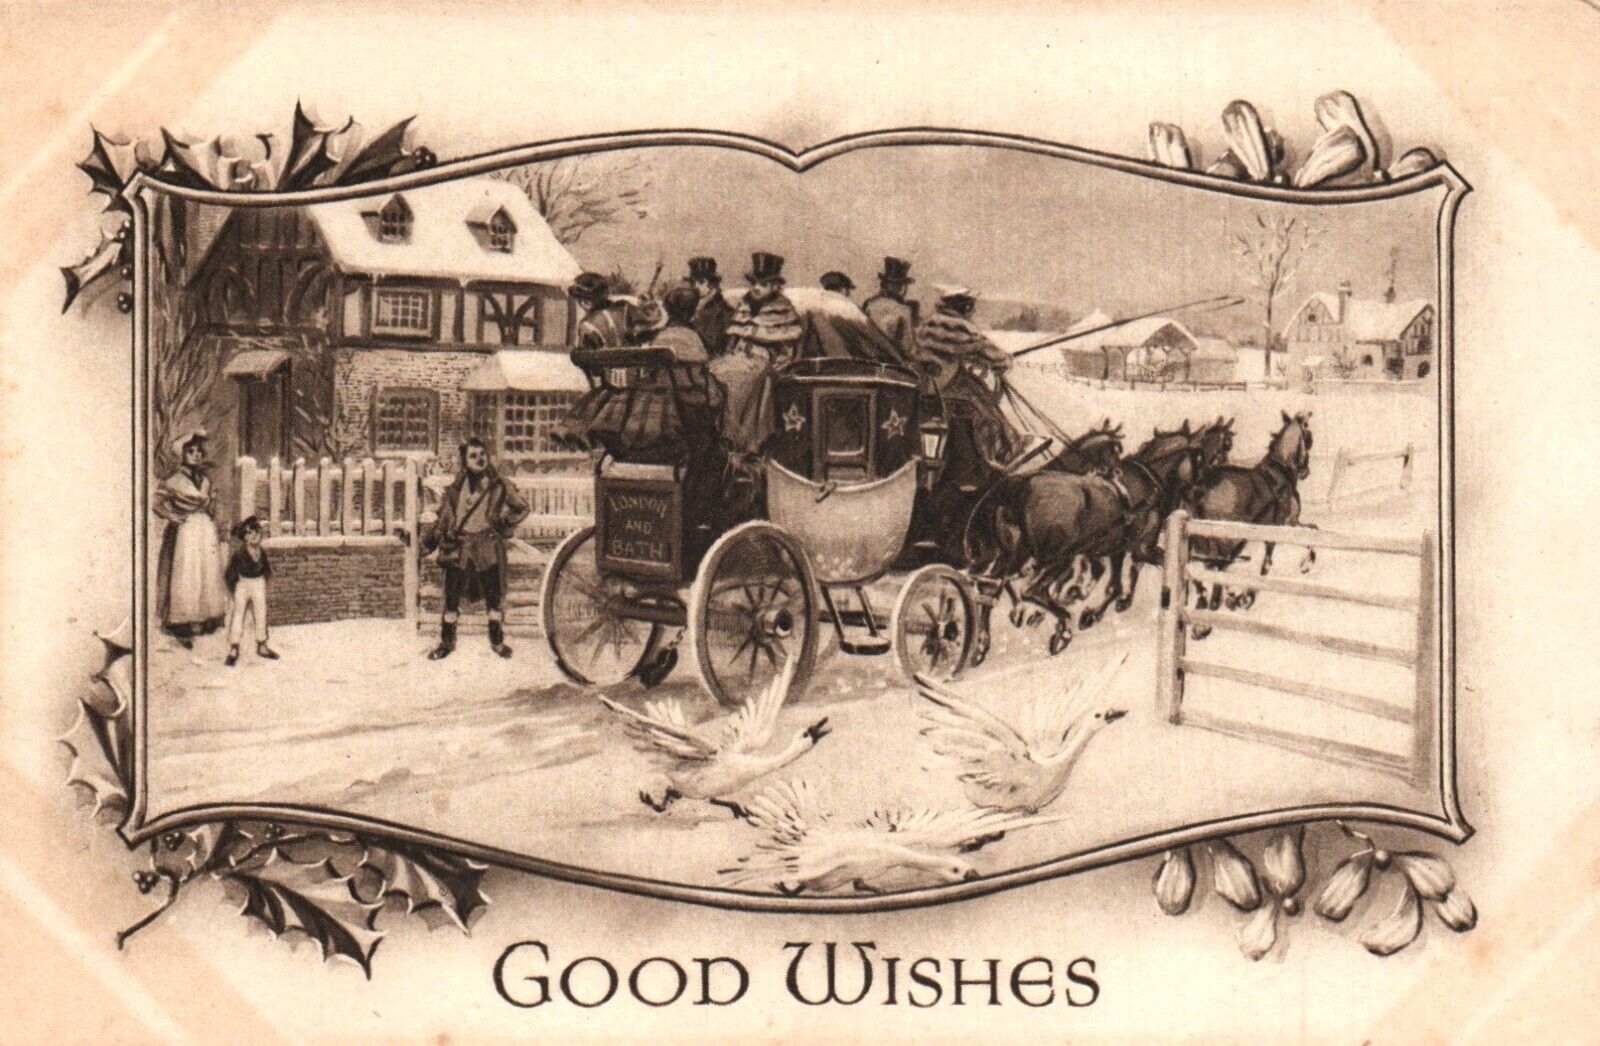 Vintage Christmas Greetings Postcard - Good Wishes c1918,  Horse and Carriage